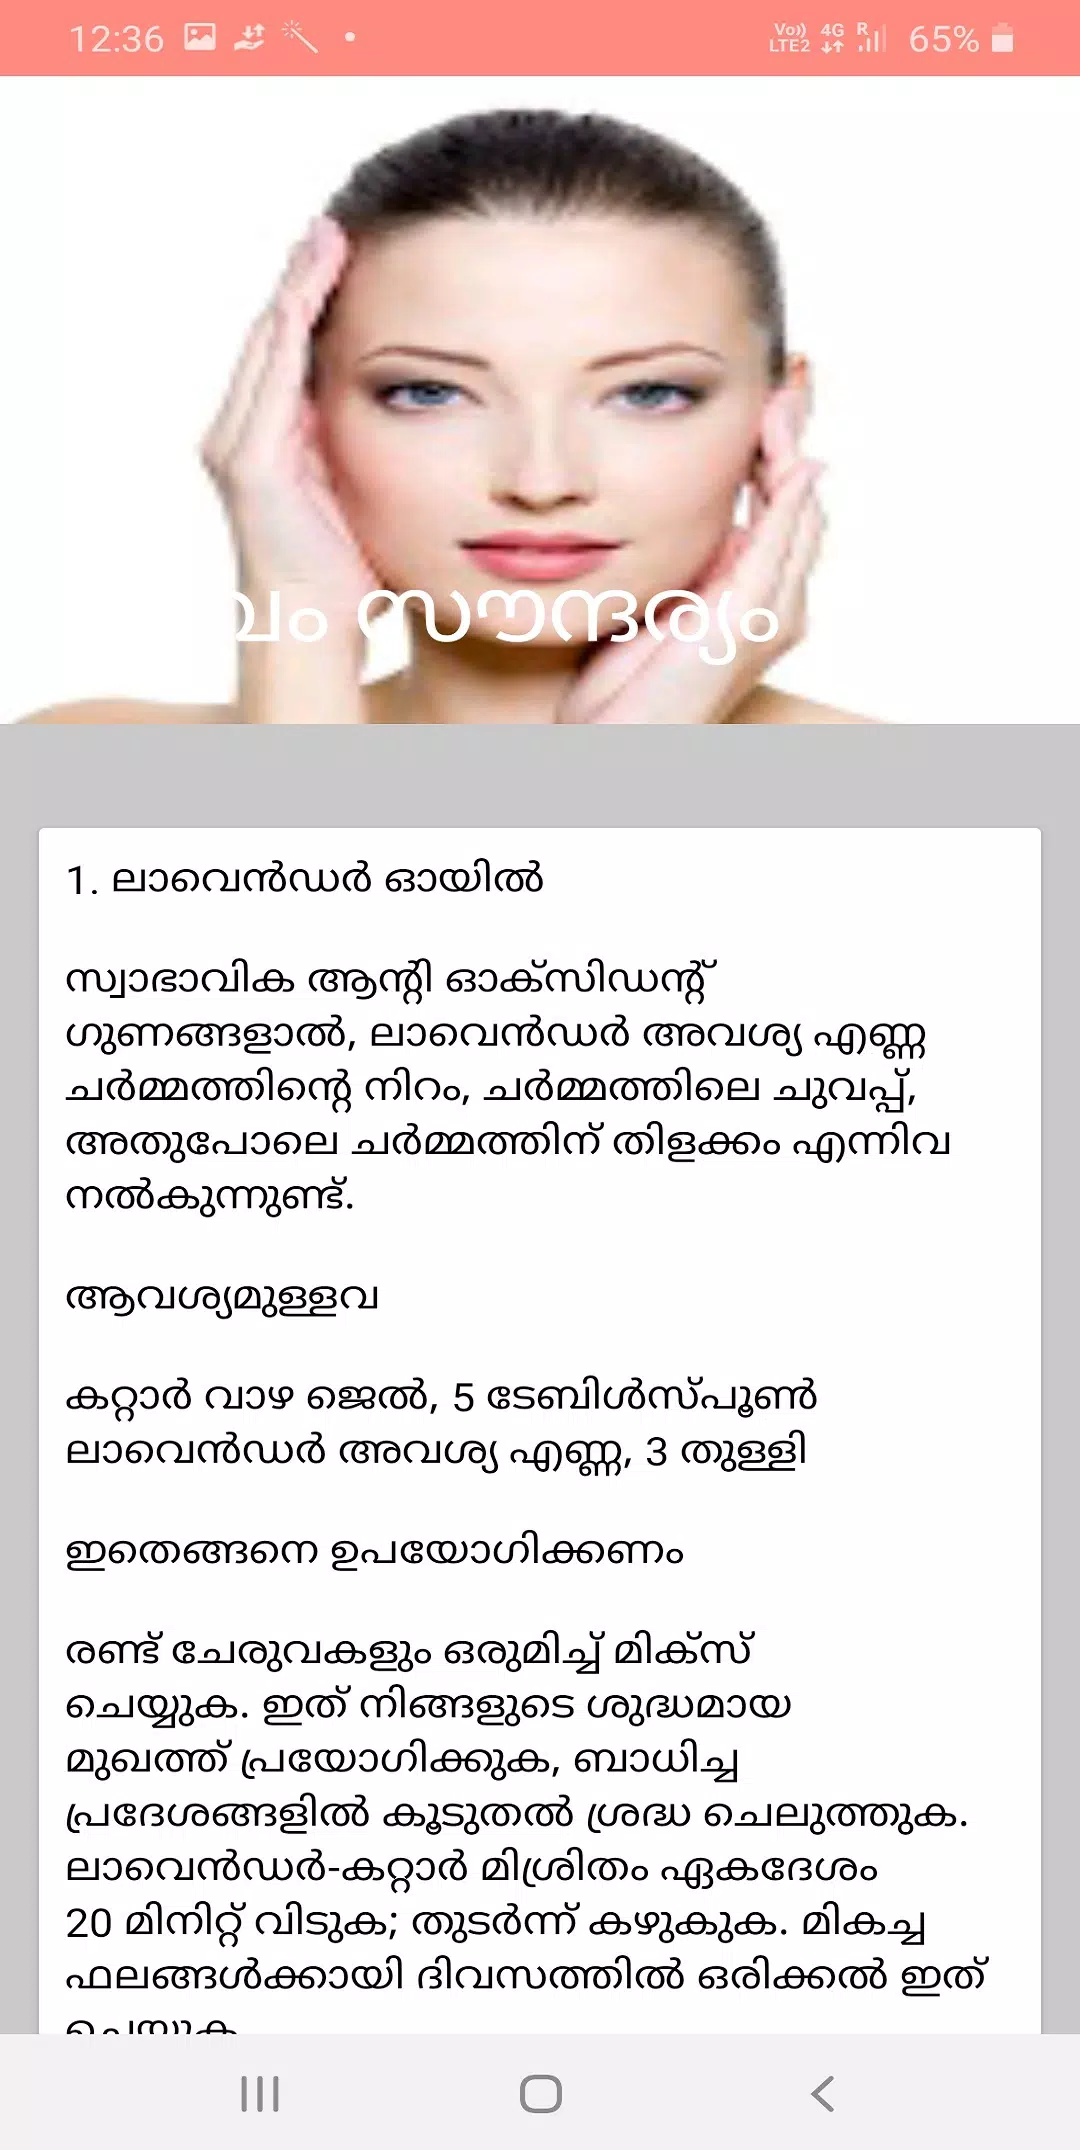 colin gilbey recommends beauty tips in malayalam pic